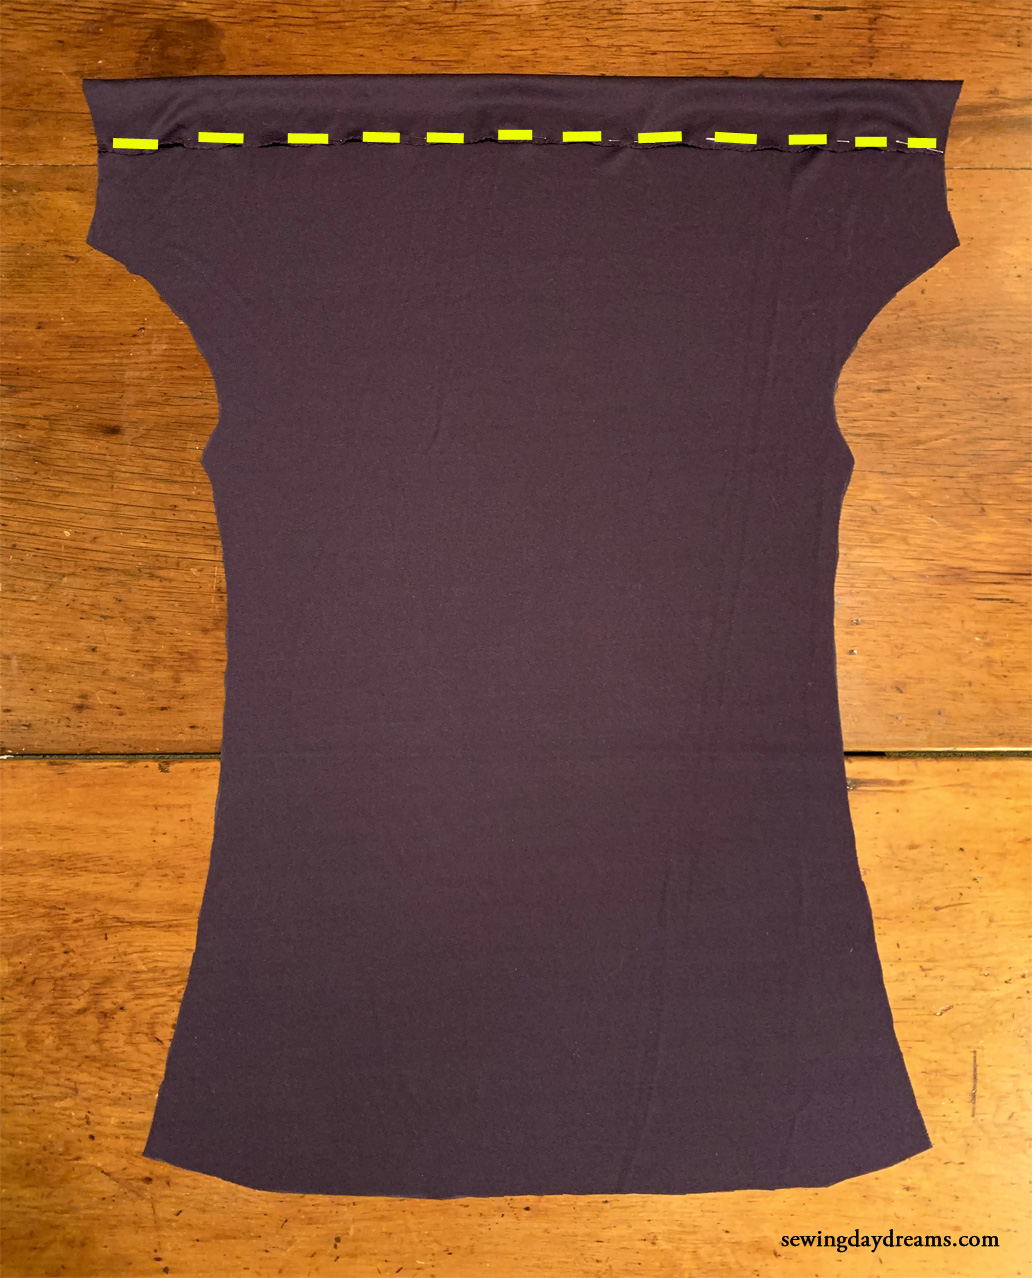 Diy Cowl Neck Top Sewing Tutorial With Contrasting Sleeves Sewing Daydreams